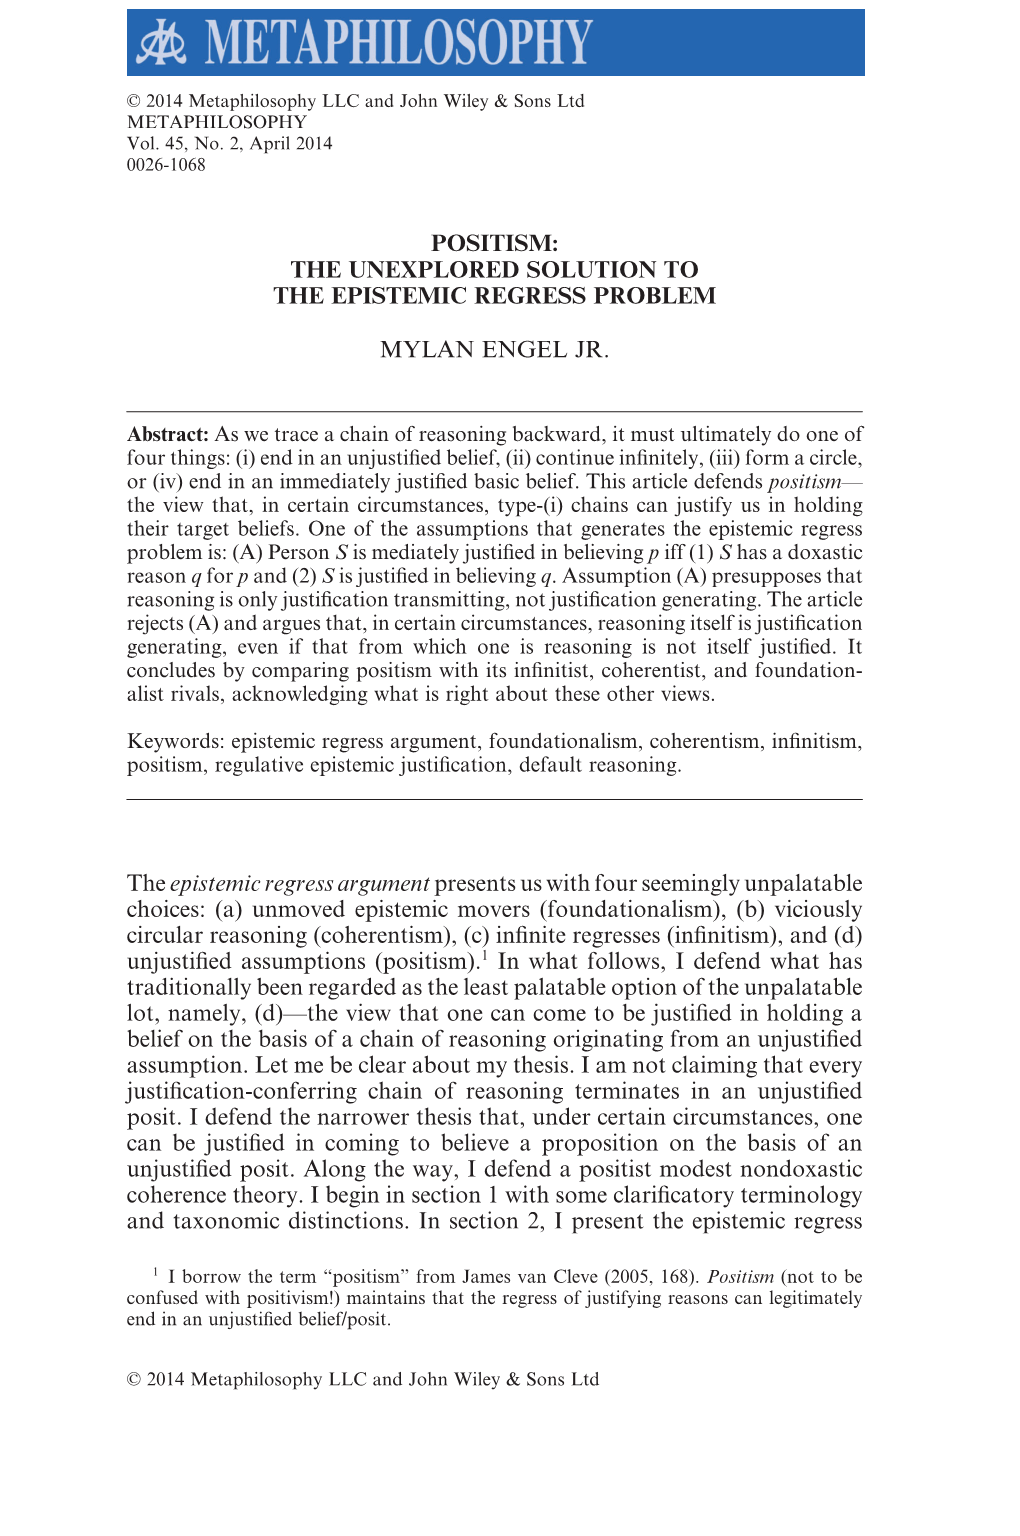 Positism: the Unexplored Solution to the Epistemic Regress Problem